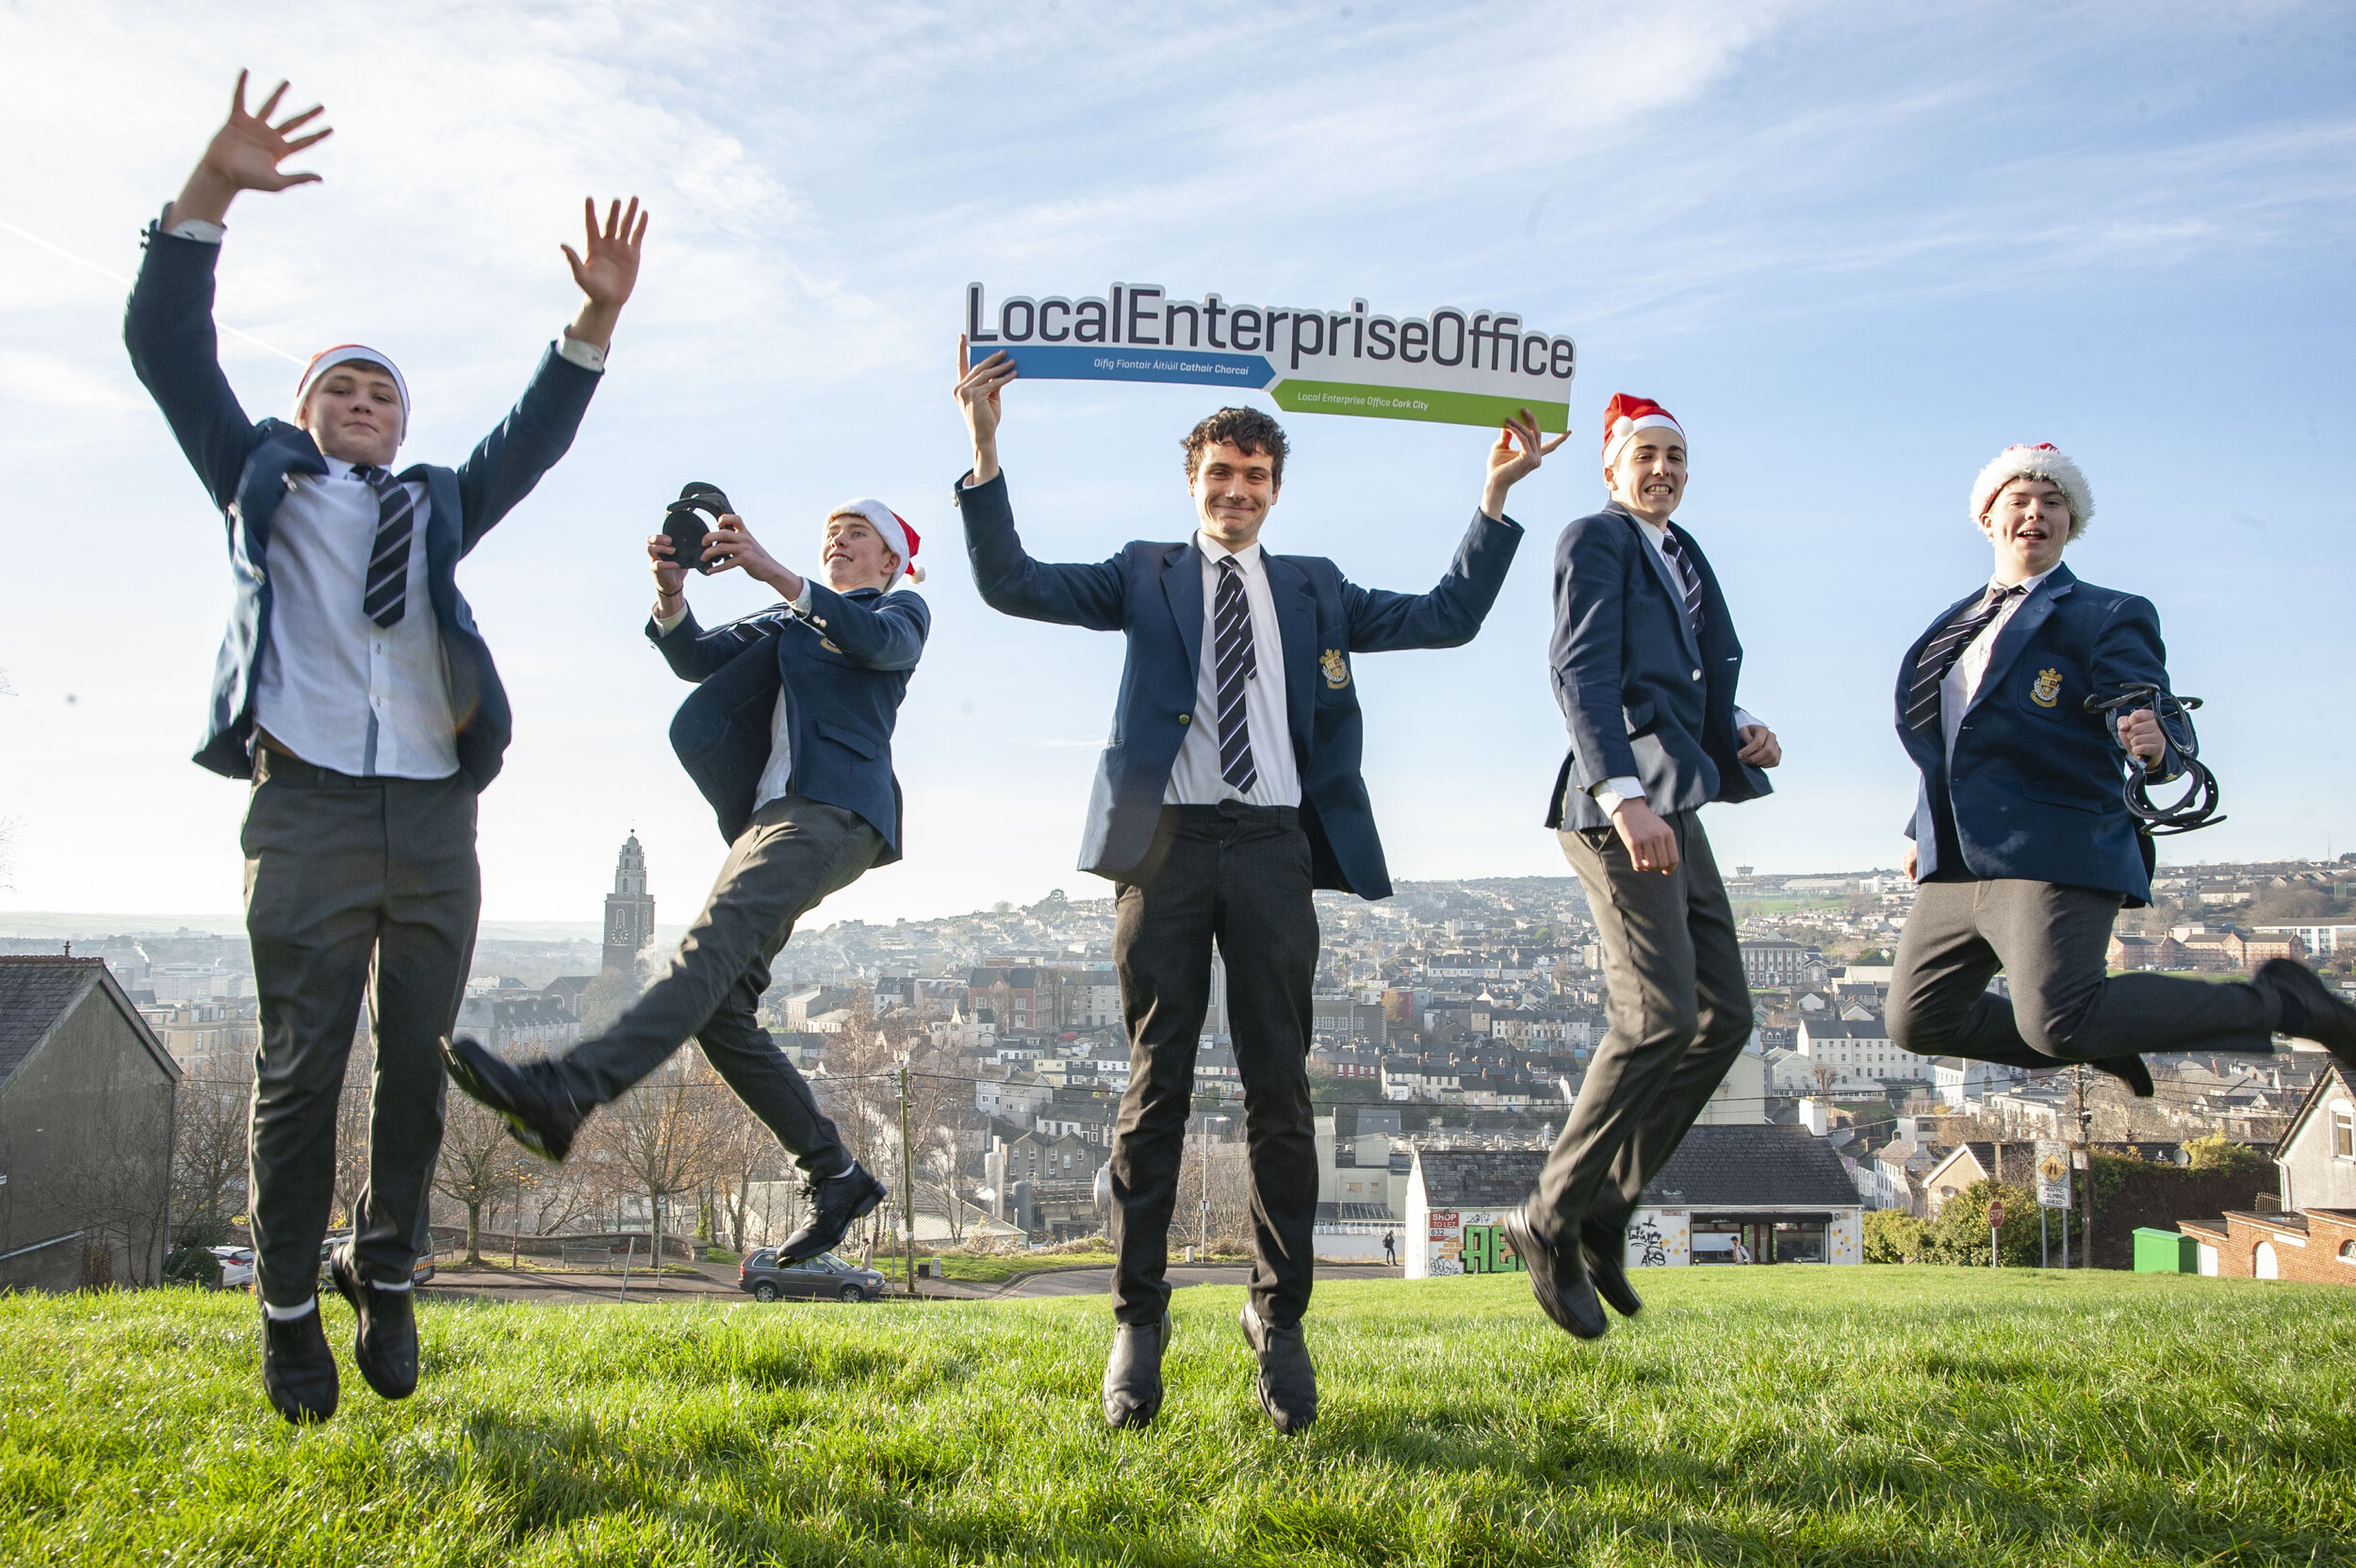  FREE PIC - NO REPRO FEE - Dec 2, 2019From left: Danny Sheahan, James Cuddigan, Conor Kelleher, Robbie Coughlan and Darren Sheehan from Presentation Sec. School get in some last minute training before the Cork LEO Schools Enterprise Christmas Trade F